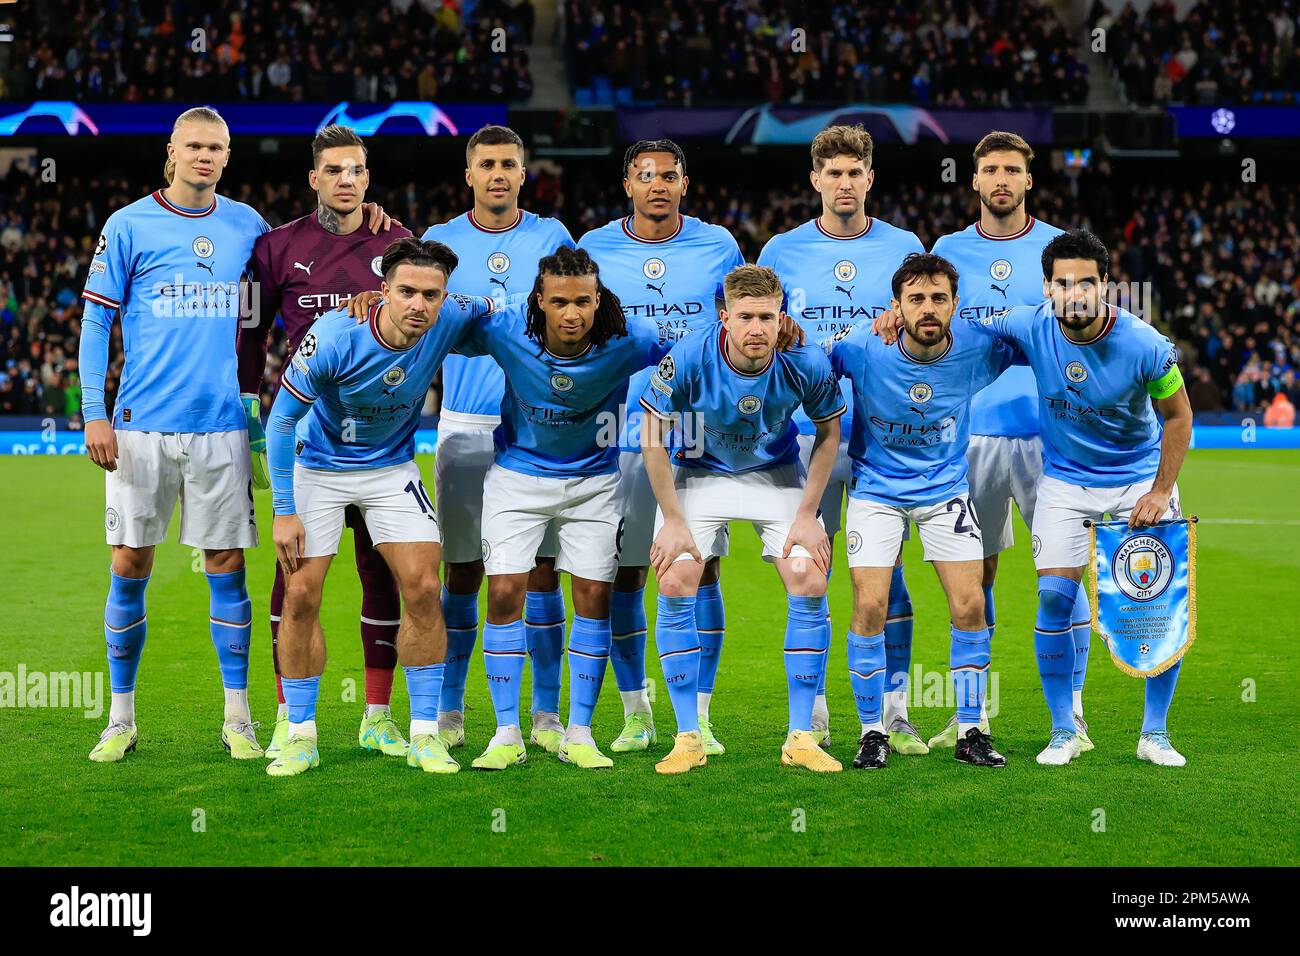 Manchester city fc Stock Photos, Royalty Free Manchester city fc